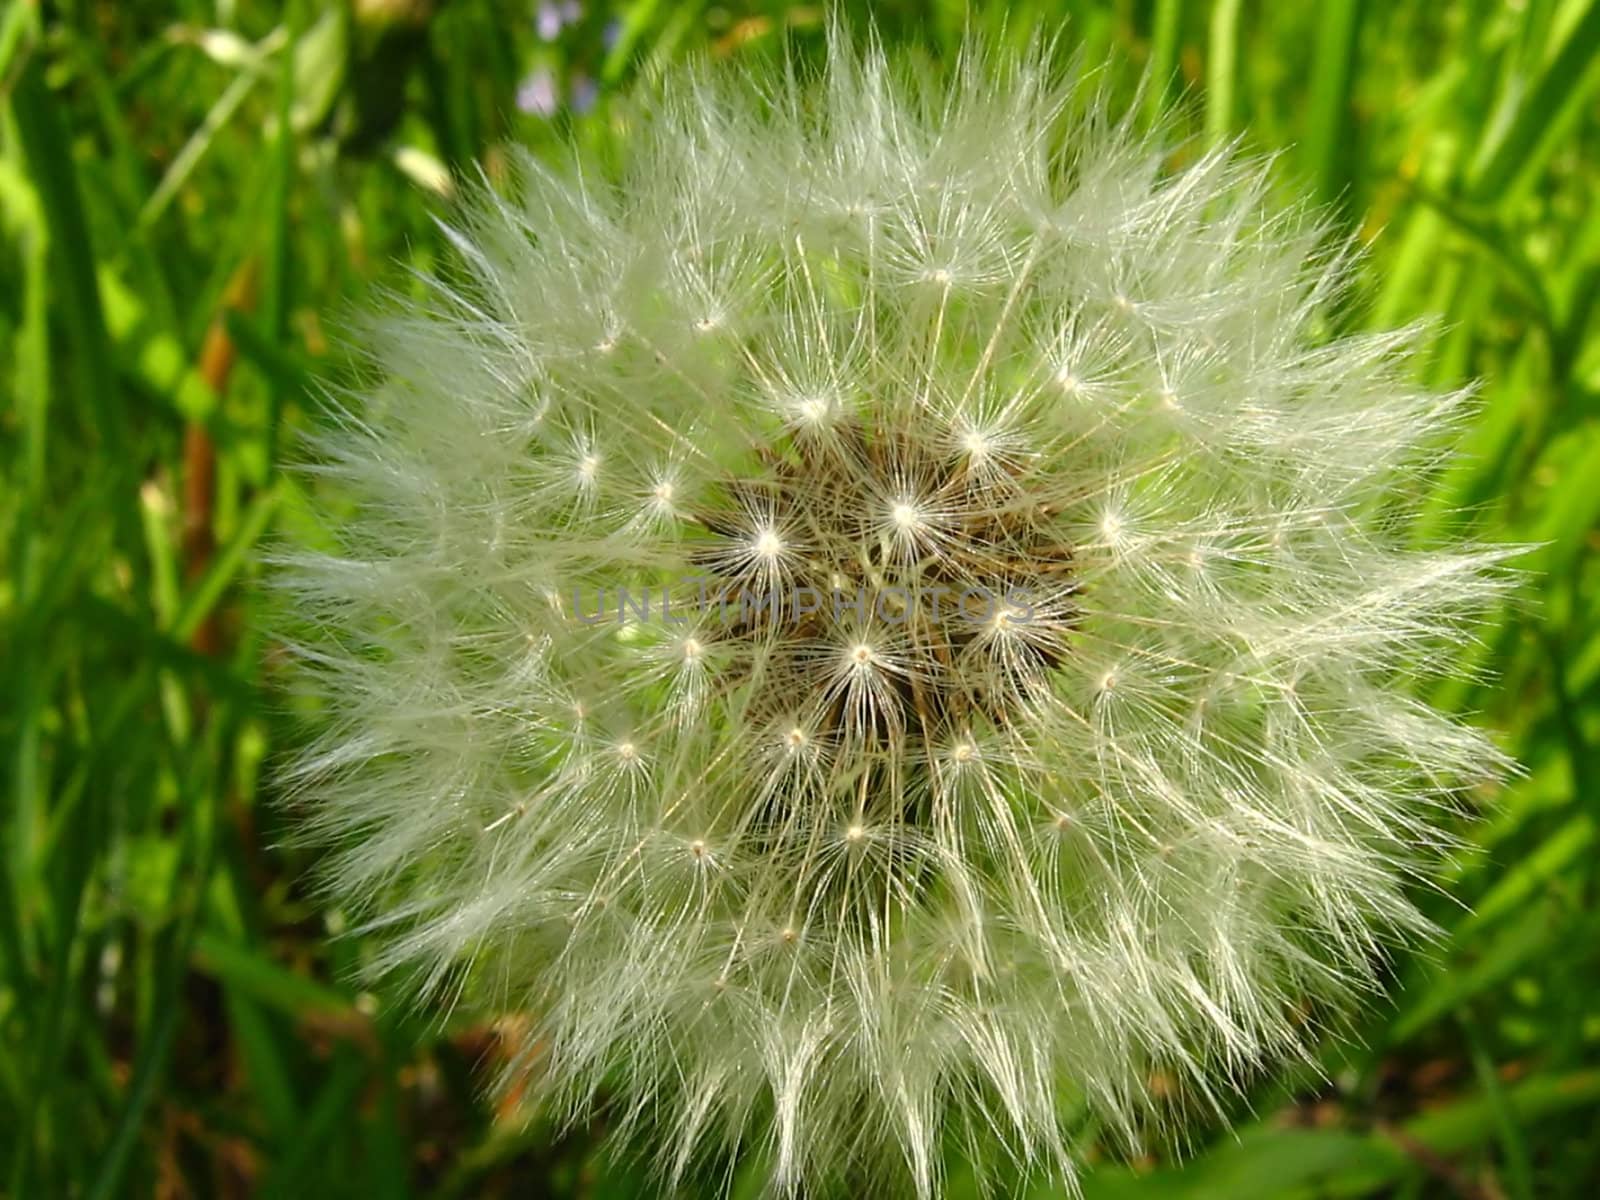 A photograph of the seeds of a Dandelion flower (Latin  Name: Taraxacum officinale).